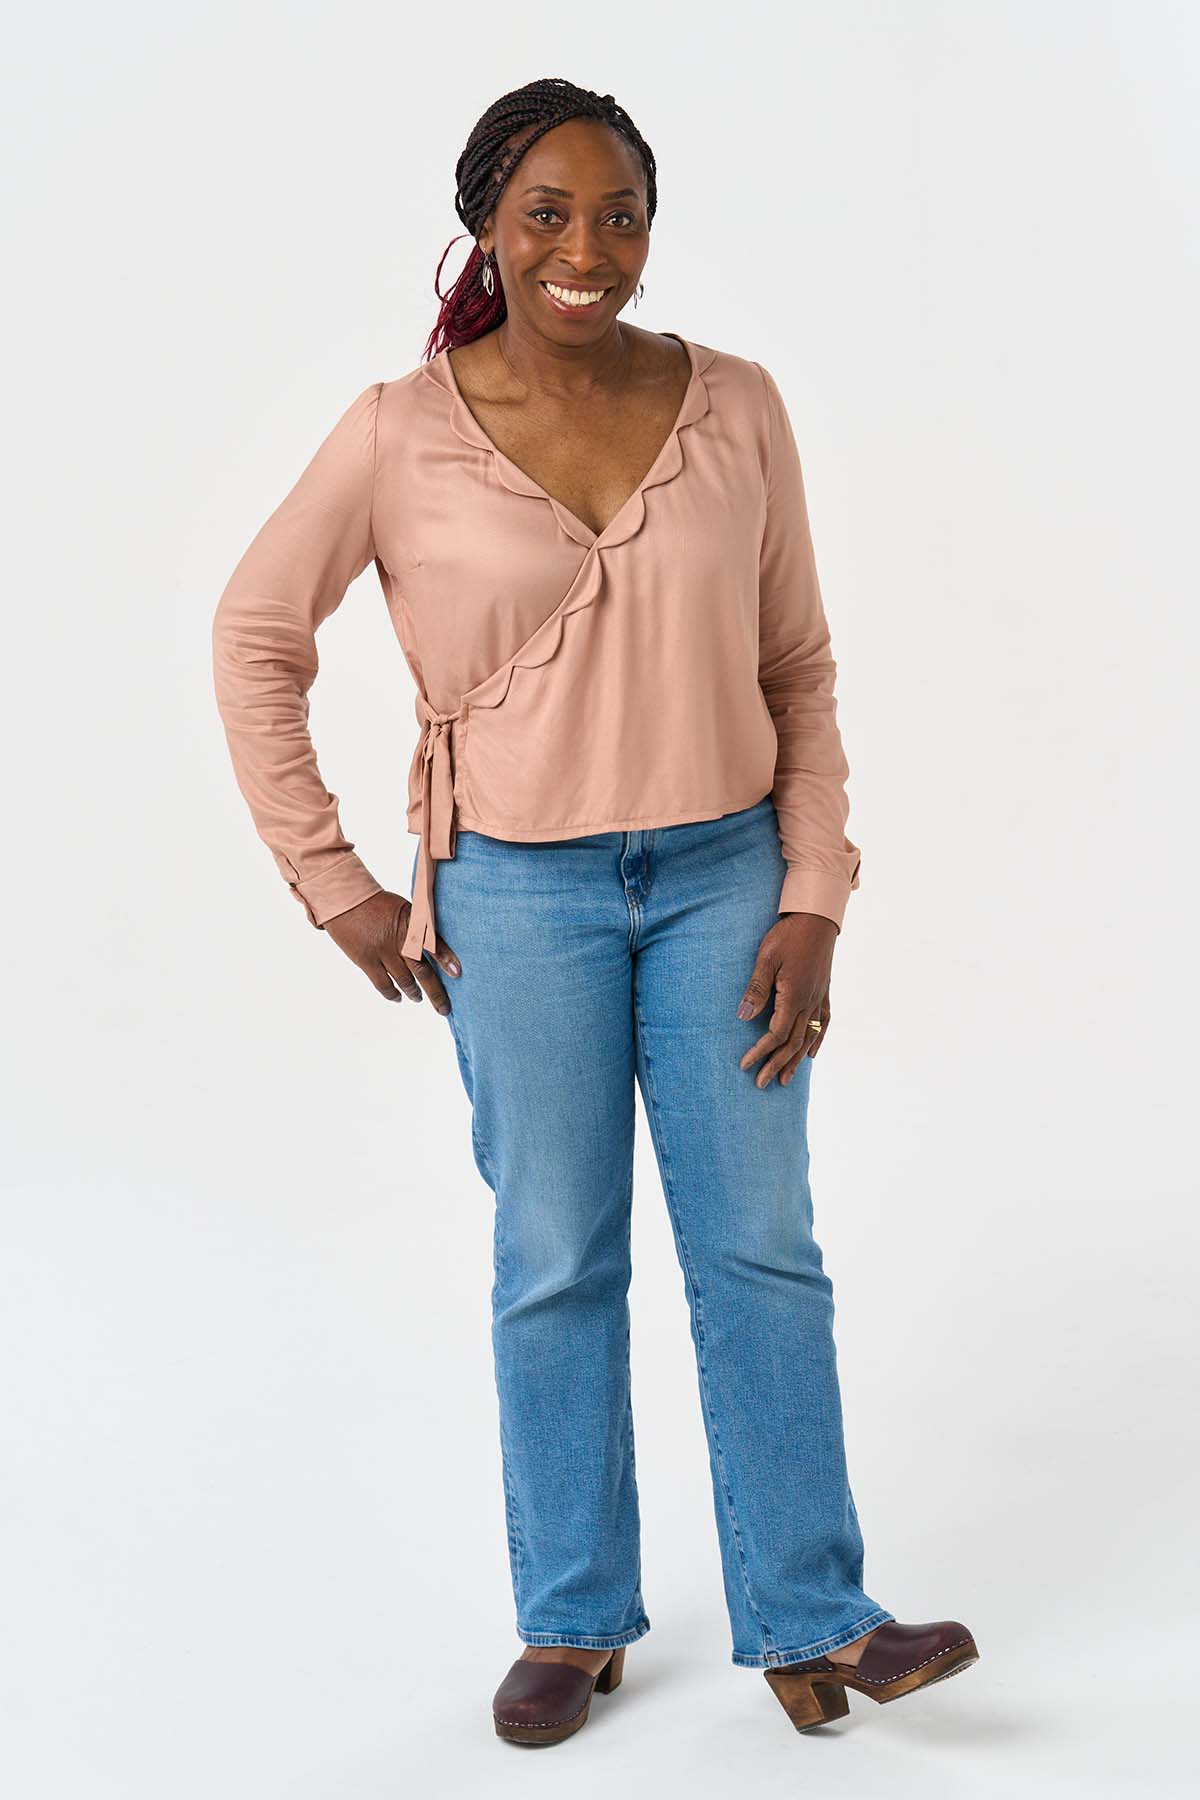 Sew the scalloped Josephine Blouse - PDF Sewing Pattern - Sew Over It